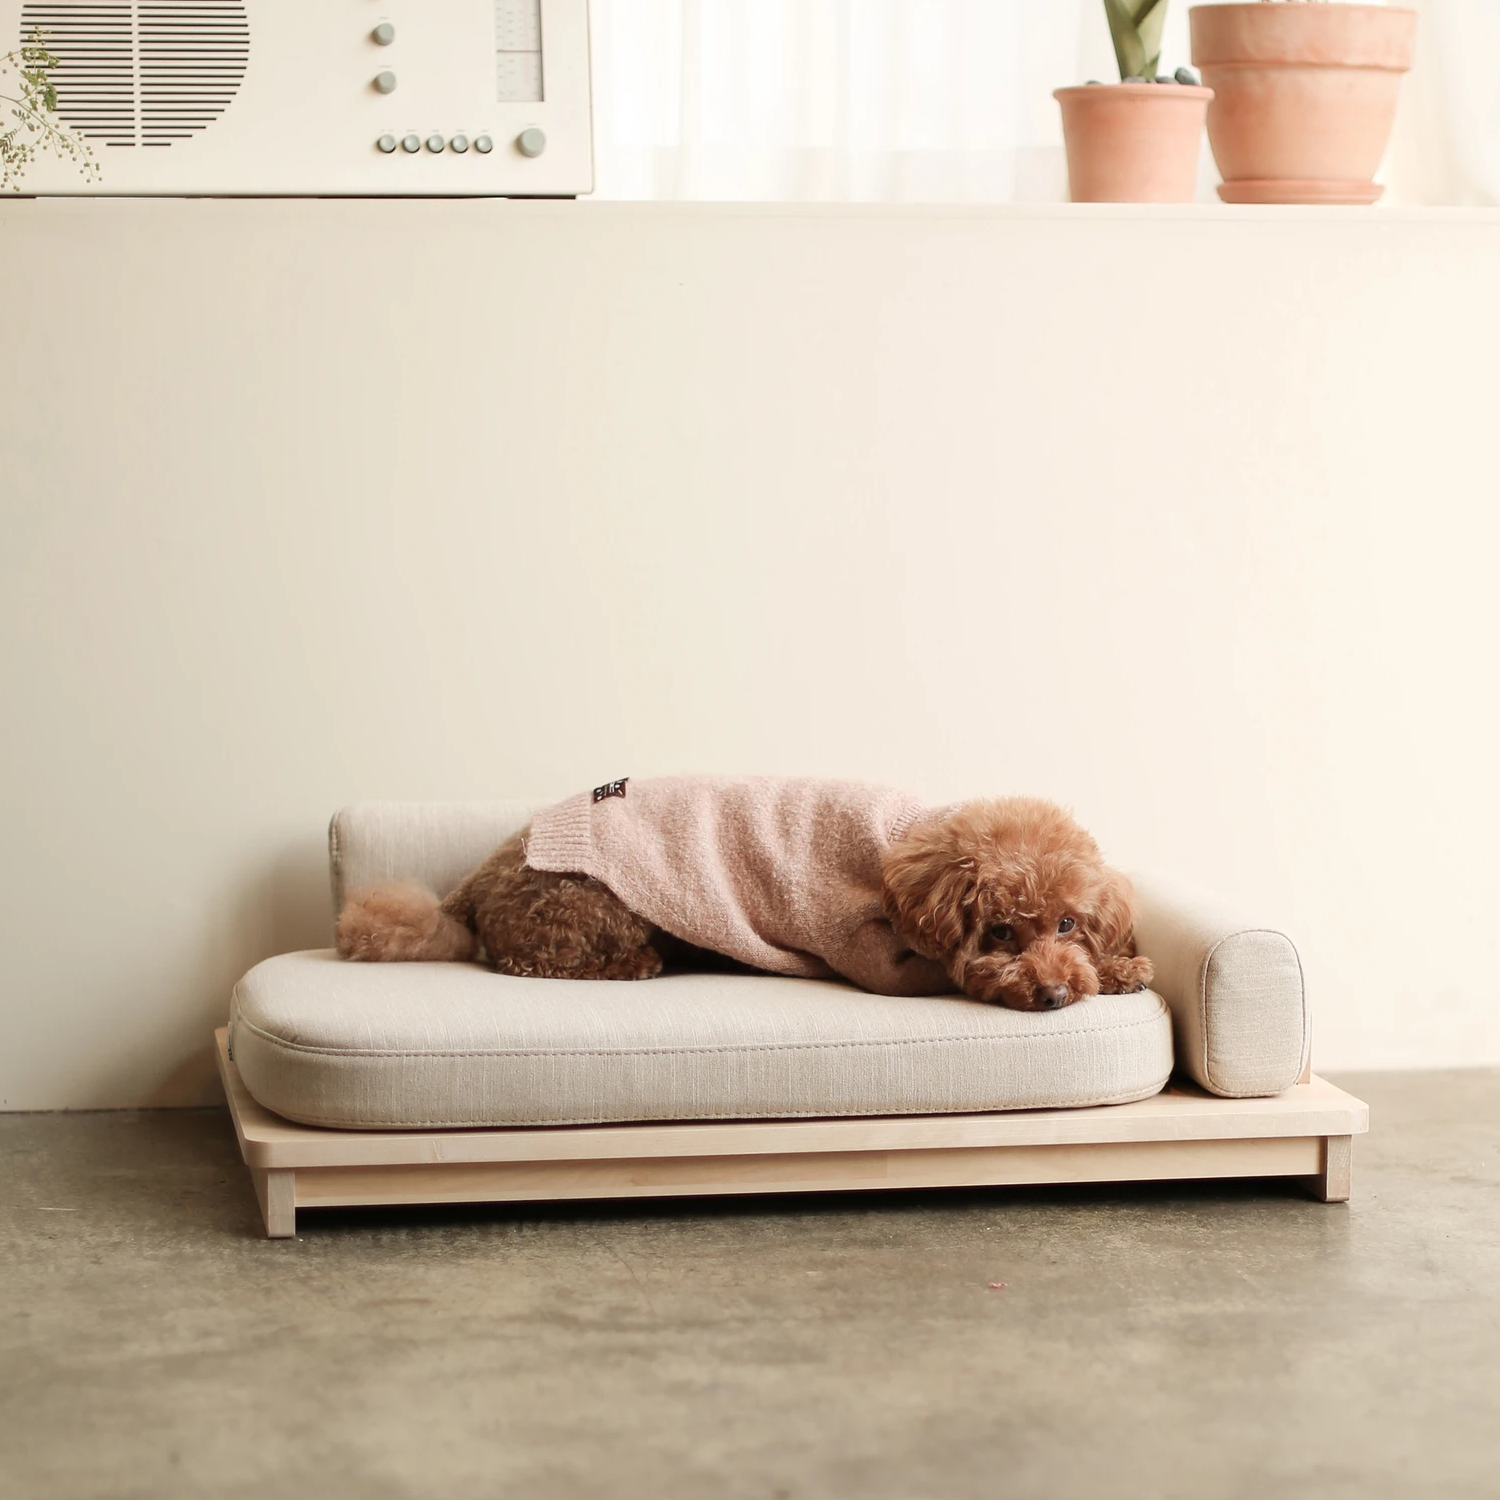 Pet Boutique - Dog Beds - Oatmeal Linden Day Dog Bed by Pets So Good